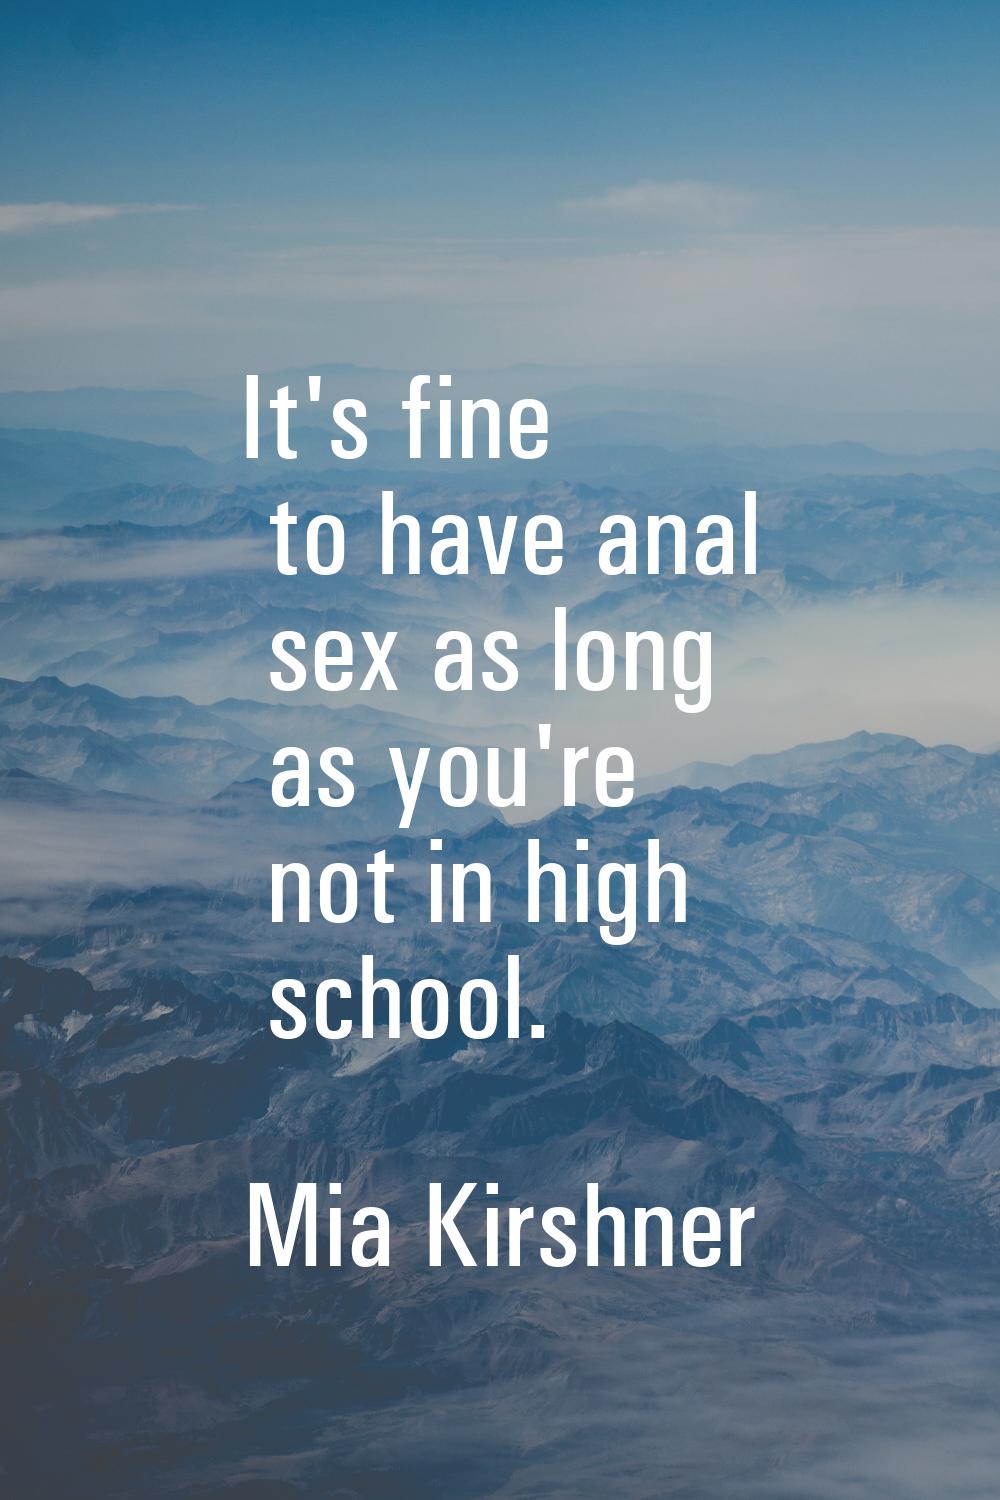 It's fine to have anal sex as long as you're not in high school.